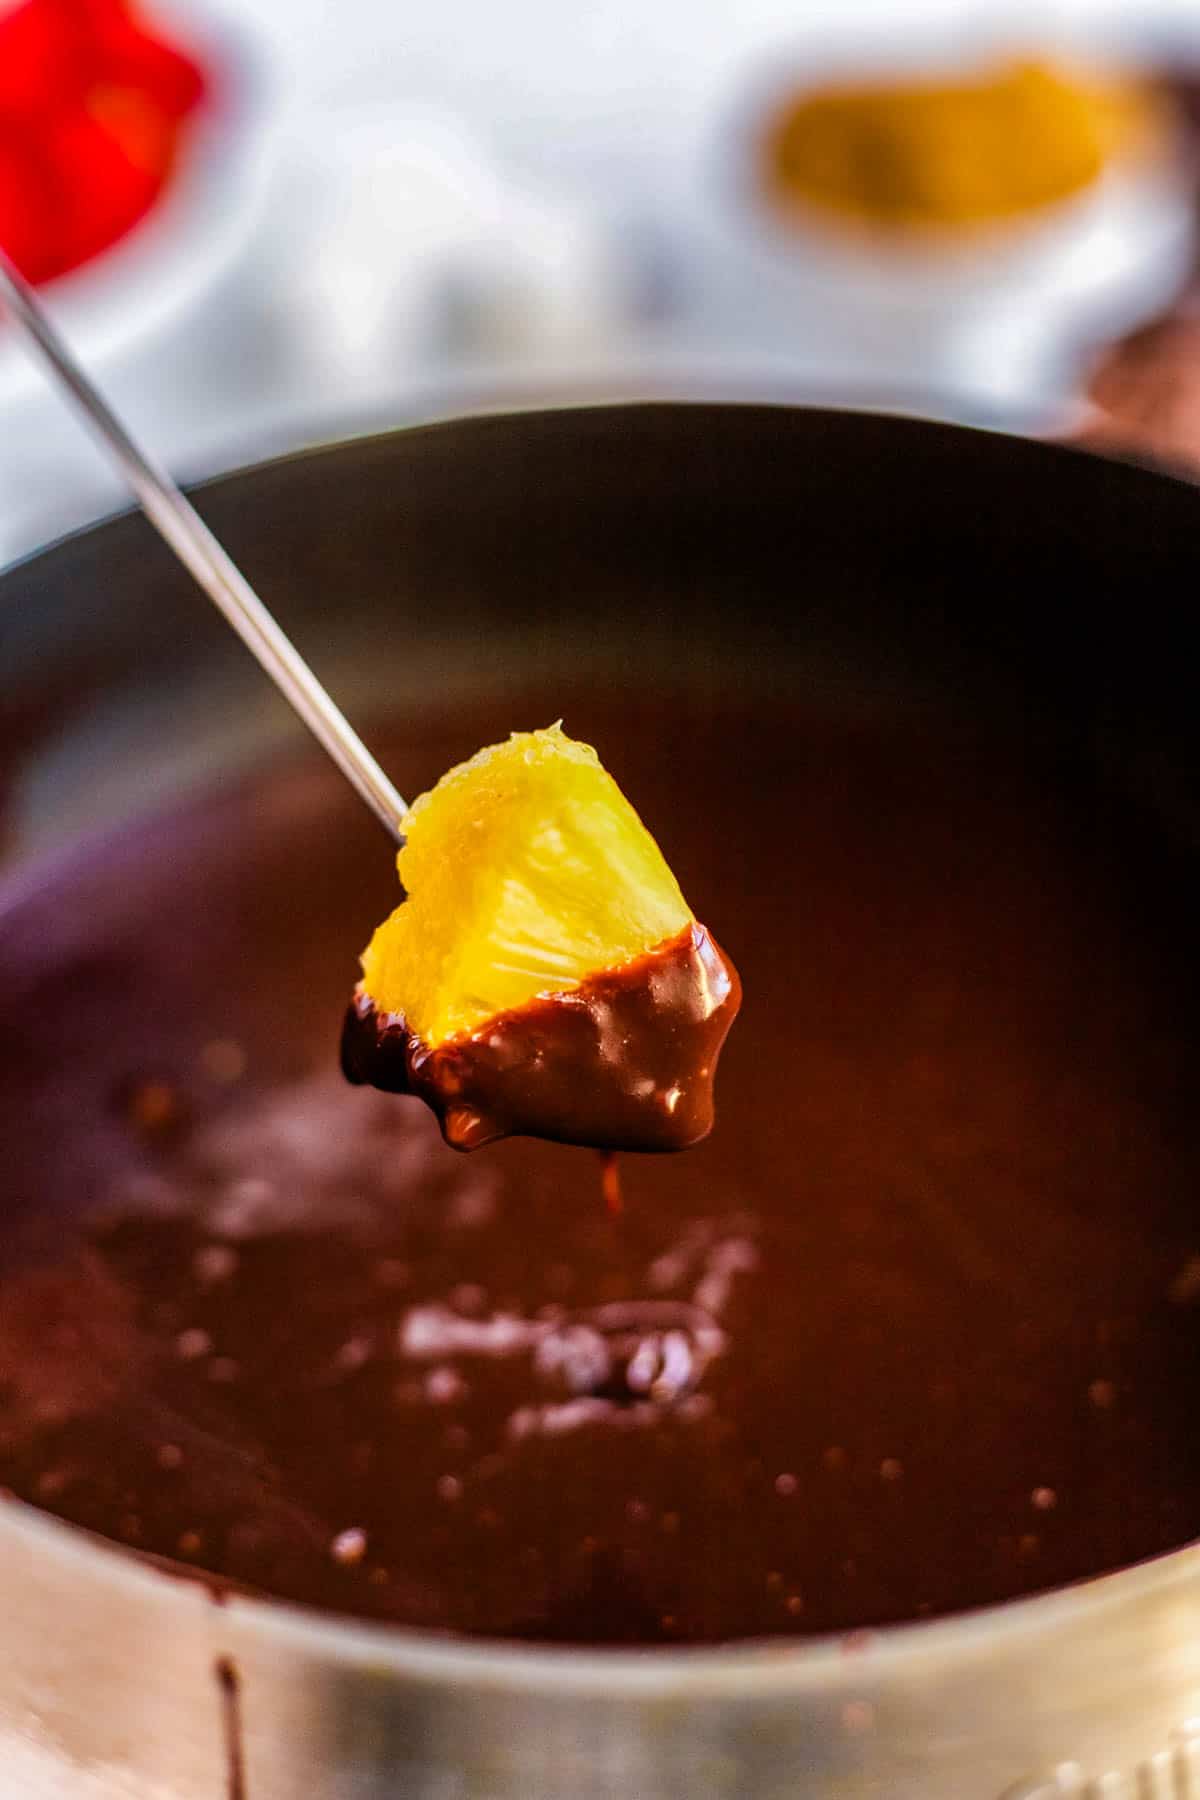 A piece of pineapple that was just dipped into milk chocolate fondue.